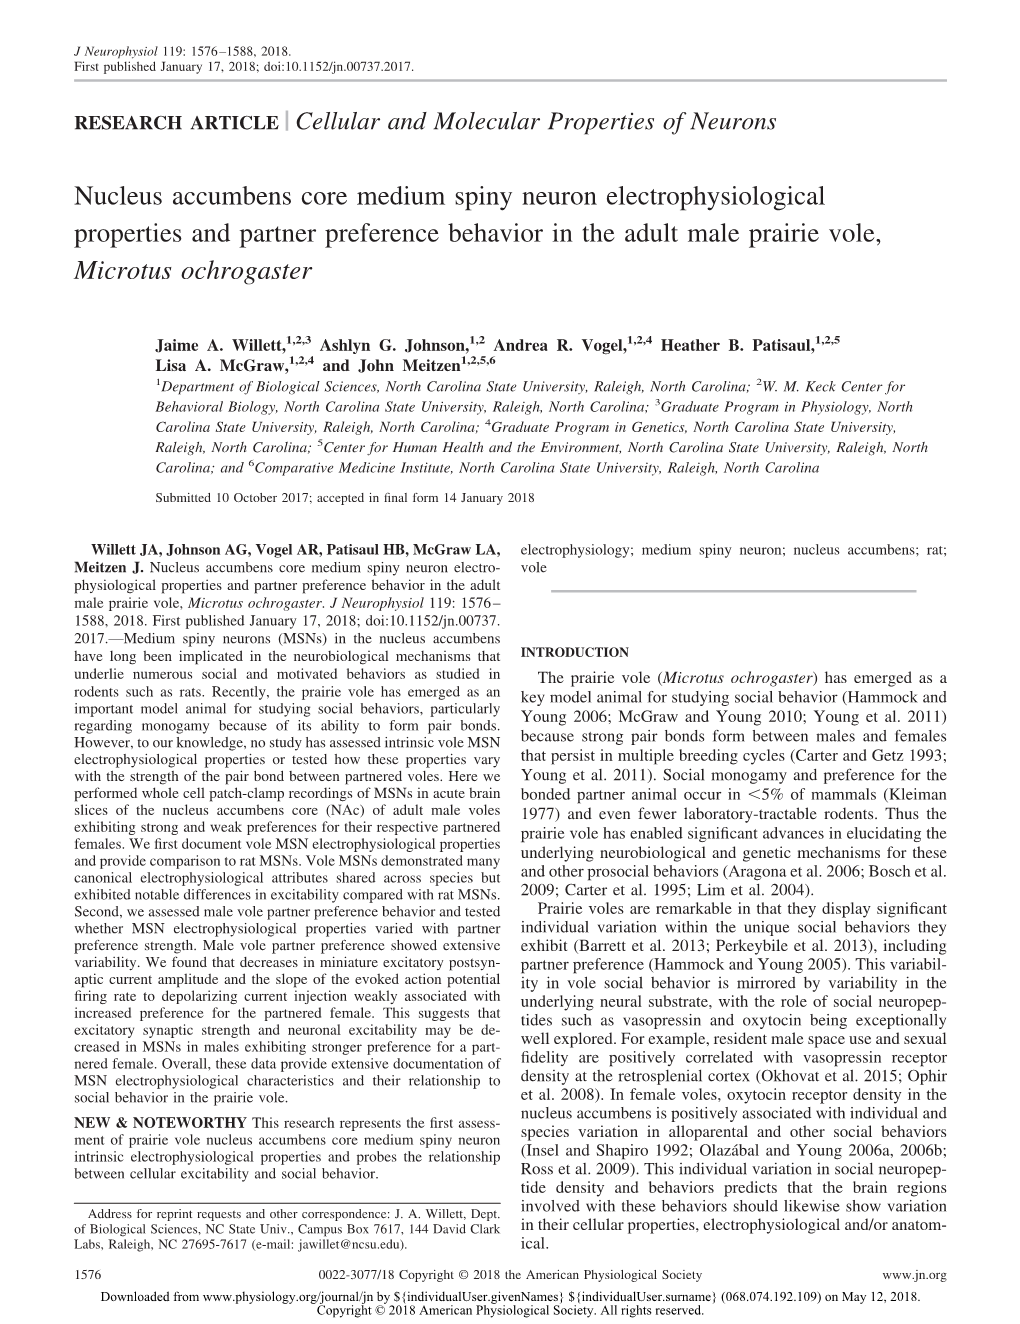 Nucleus Accumbens Core Medium Spiny Neuron Electrophysiological Properties and Partner Preference Behavior in the Adult Male Prairie Vole, Microtus Ochrogaster